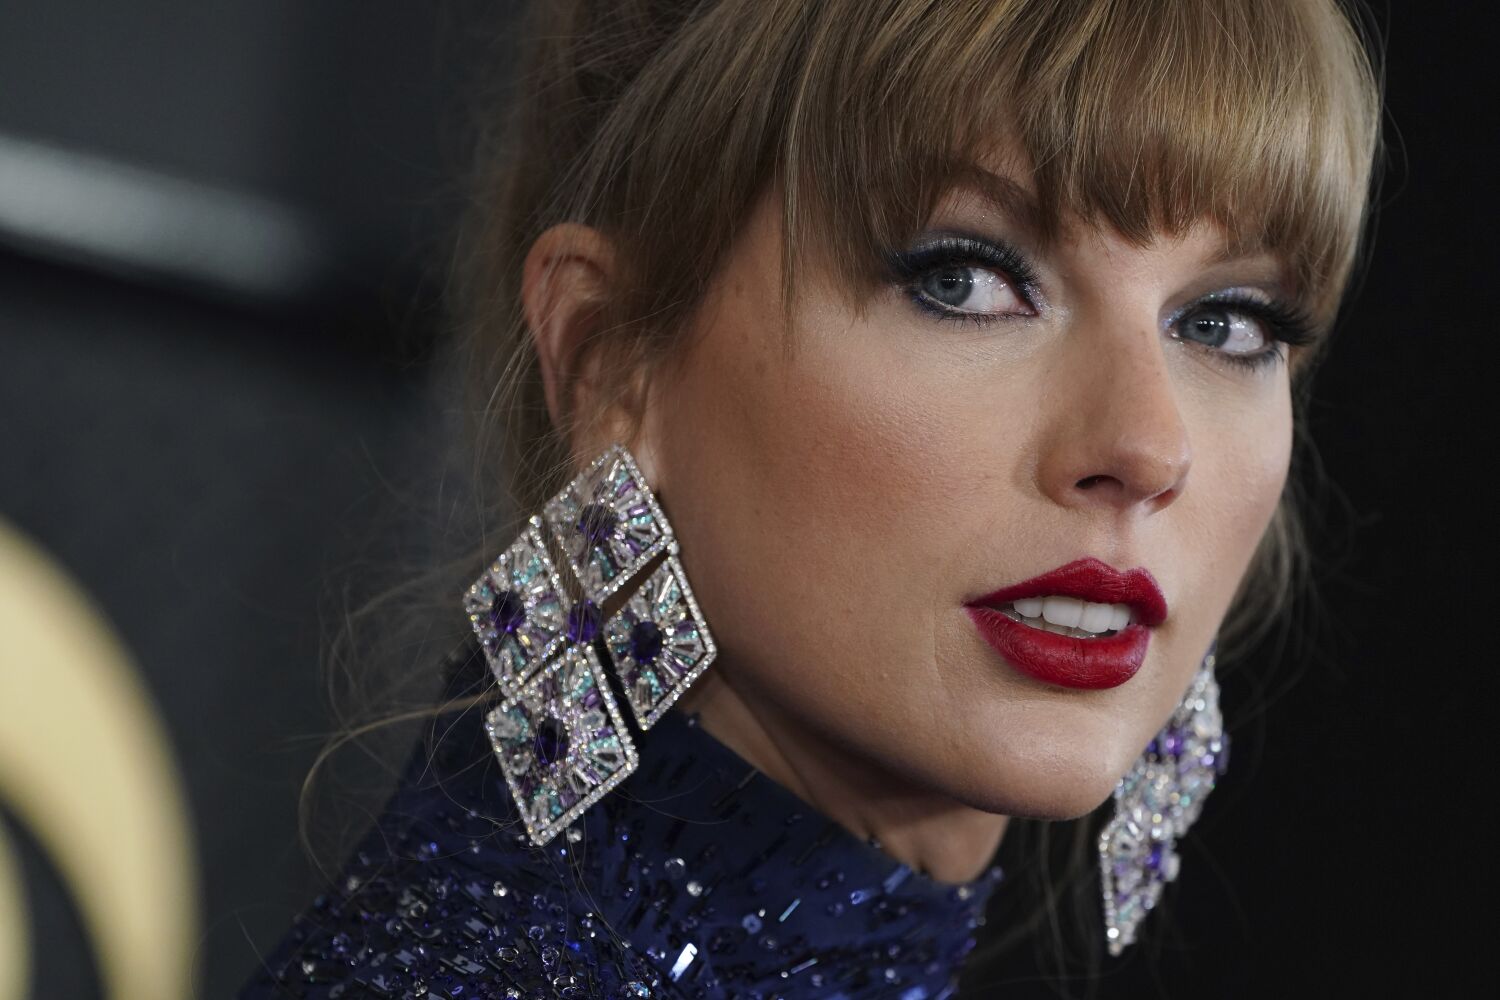 Safe and sound! Taylor Swift releases four 'Taylor's Version' songs for Eras Tour launch